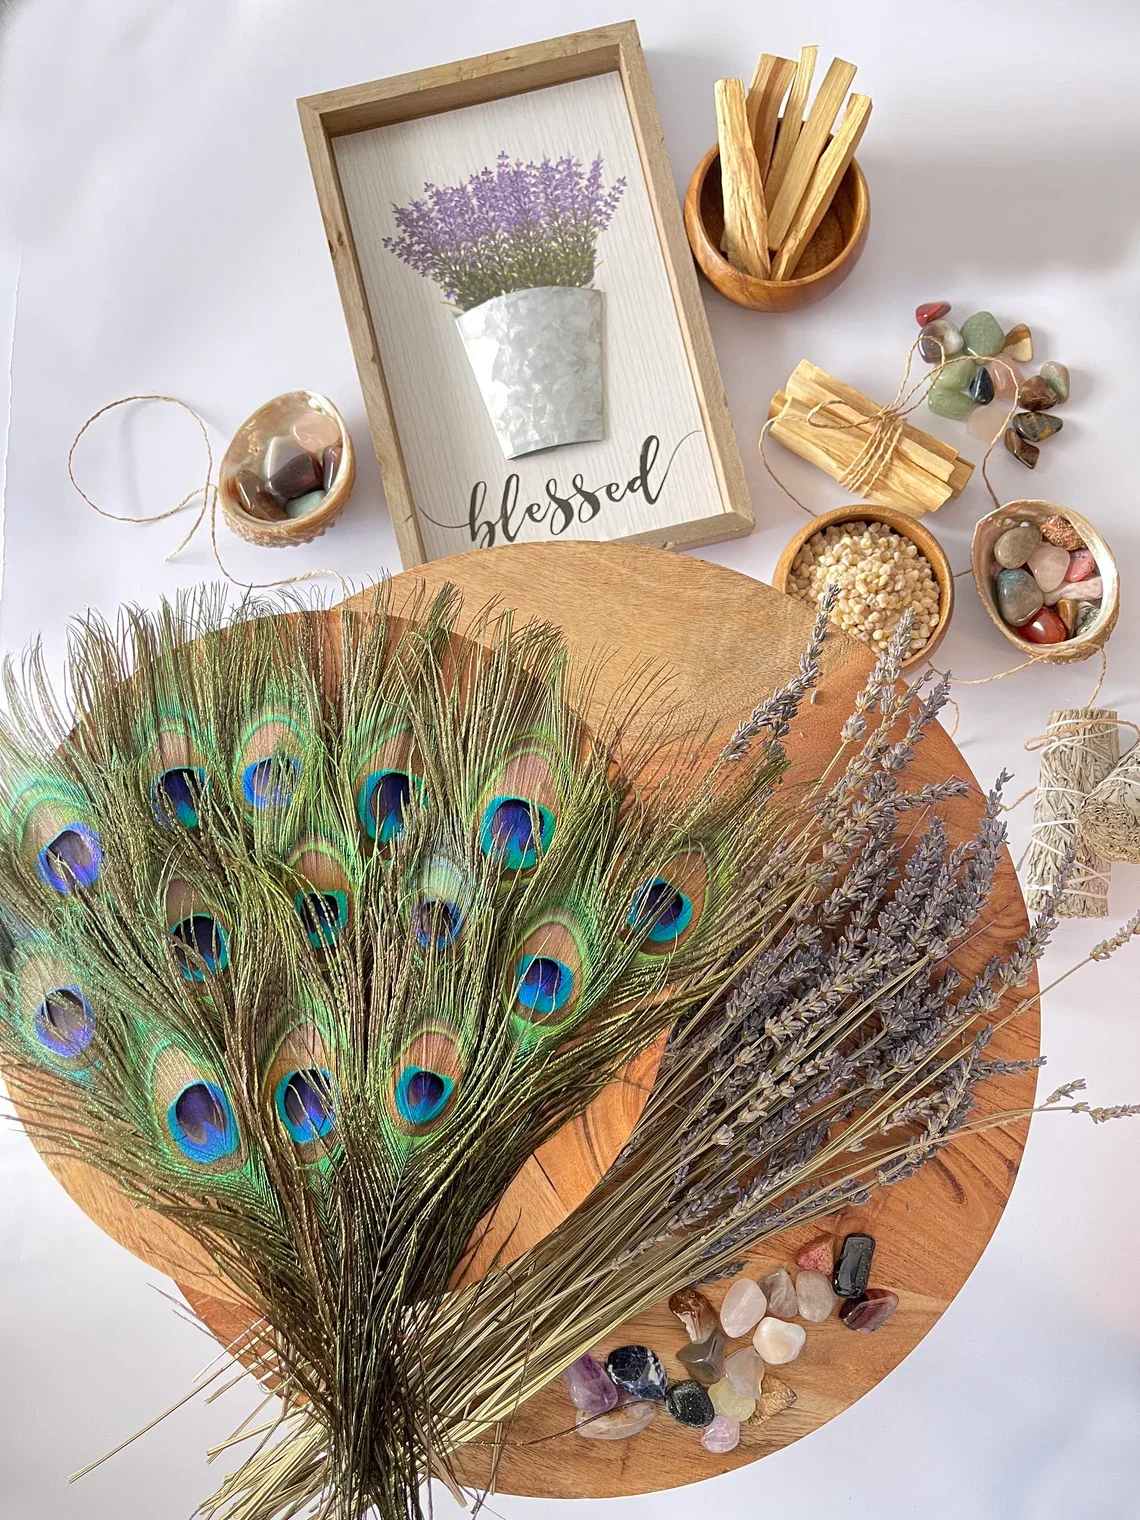 10PCS Natural Peacock Feathers 25-30cm for Wedding Vase Table